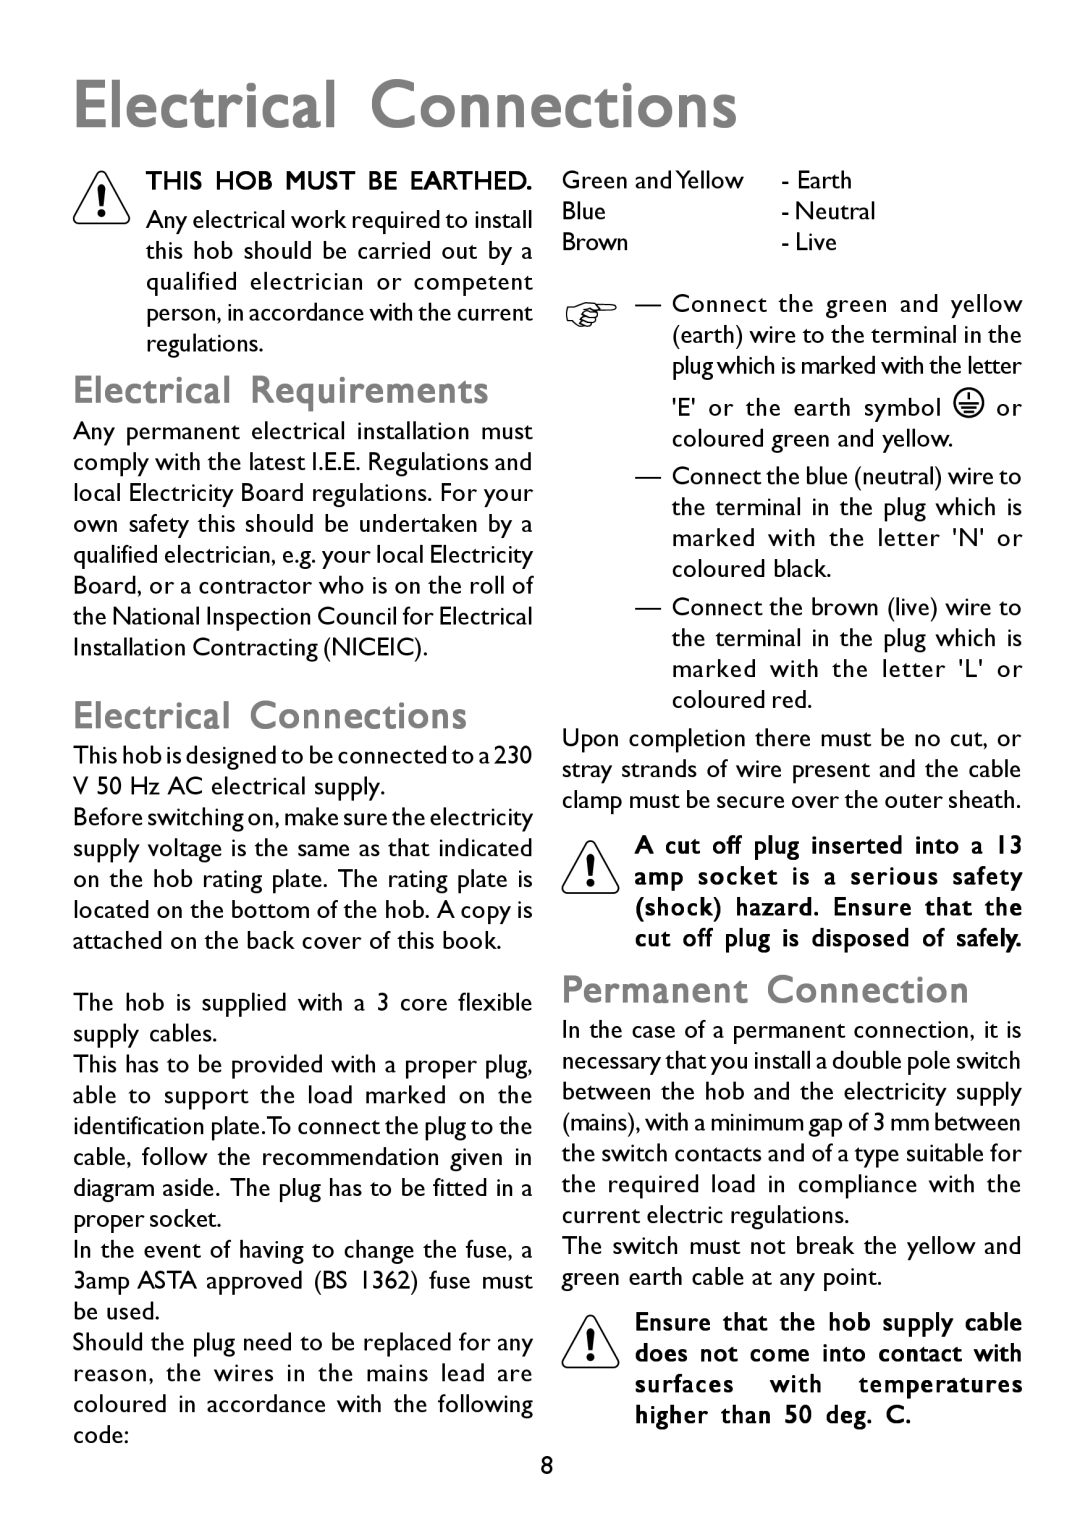 John Lewis JLBIGGH605 instruction manual Electrical Requirements, Electrical Connections, Permanent Connection 